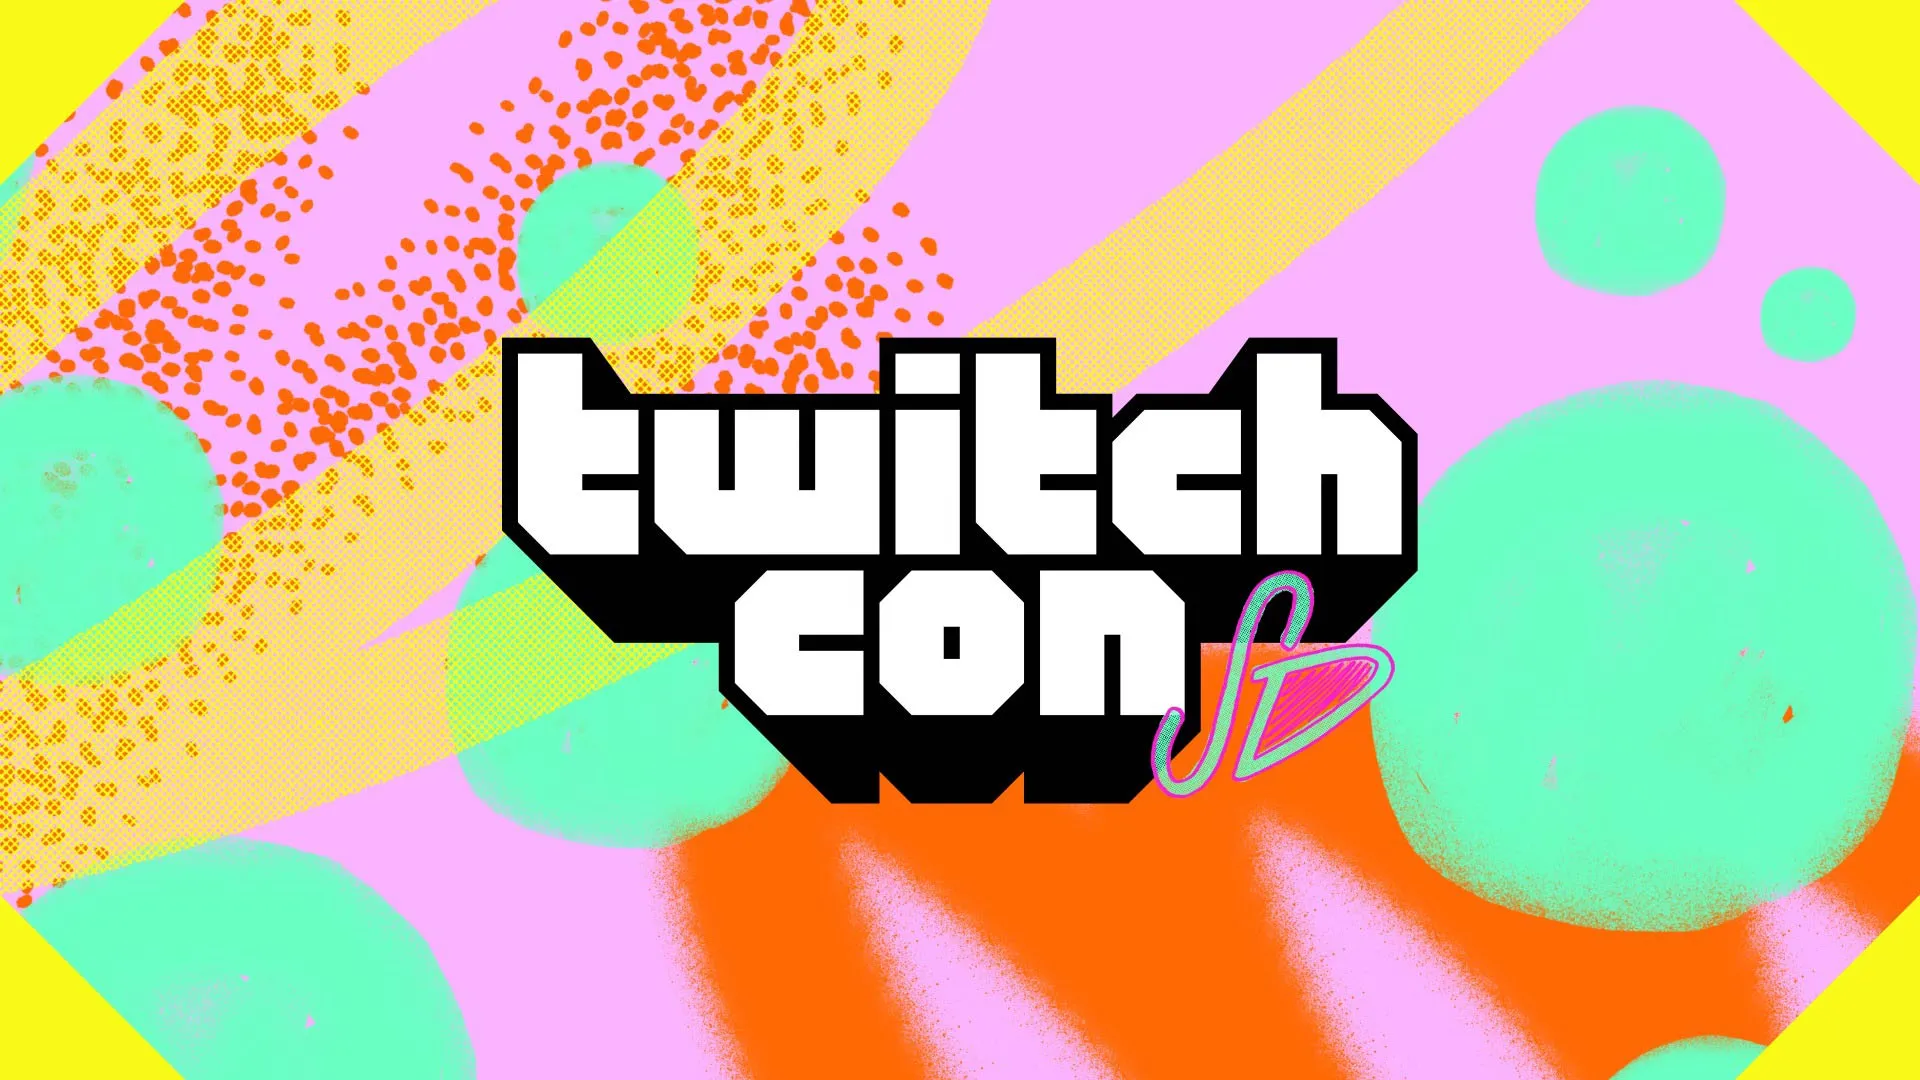 TwitchCon will require masks and proof of vaccination or negative test